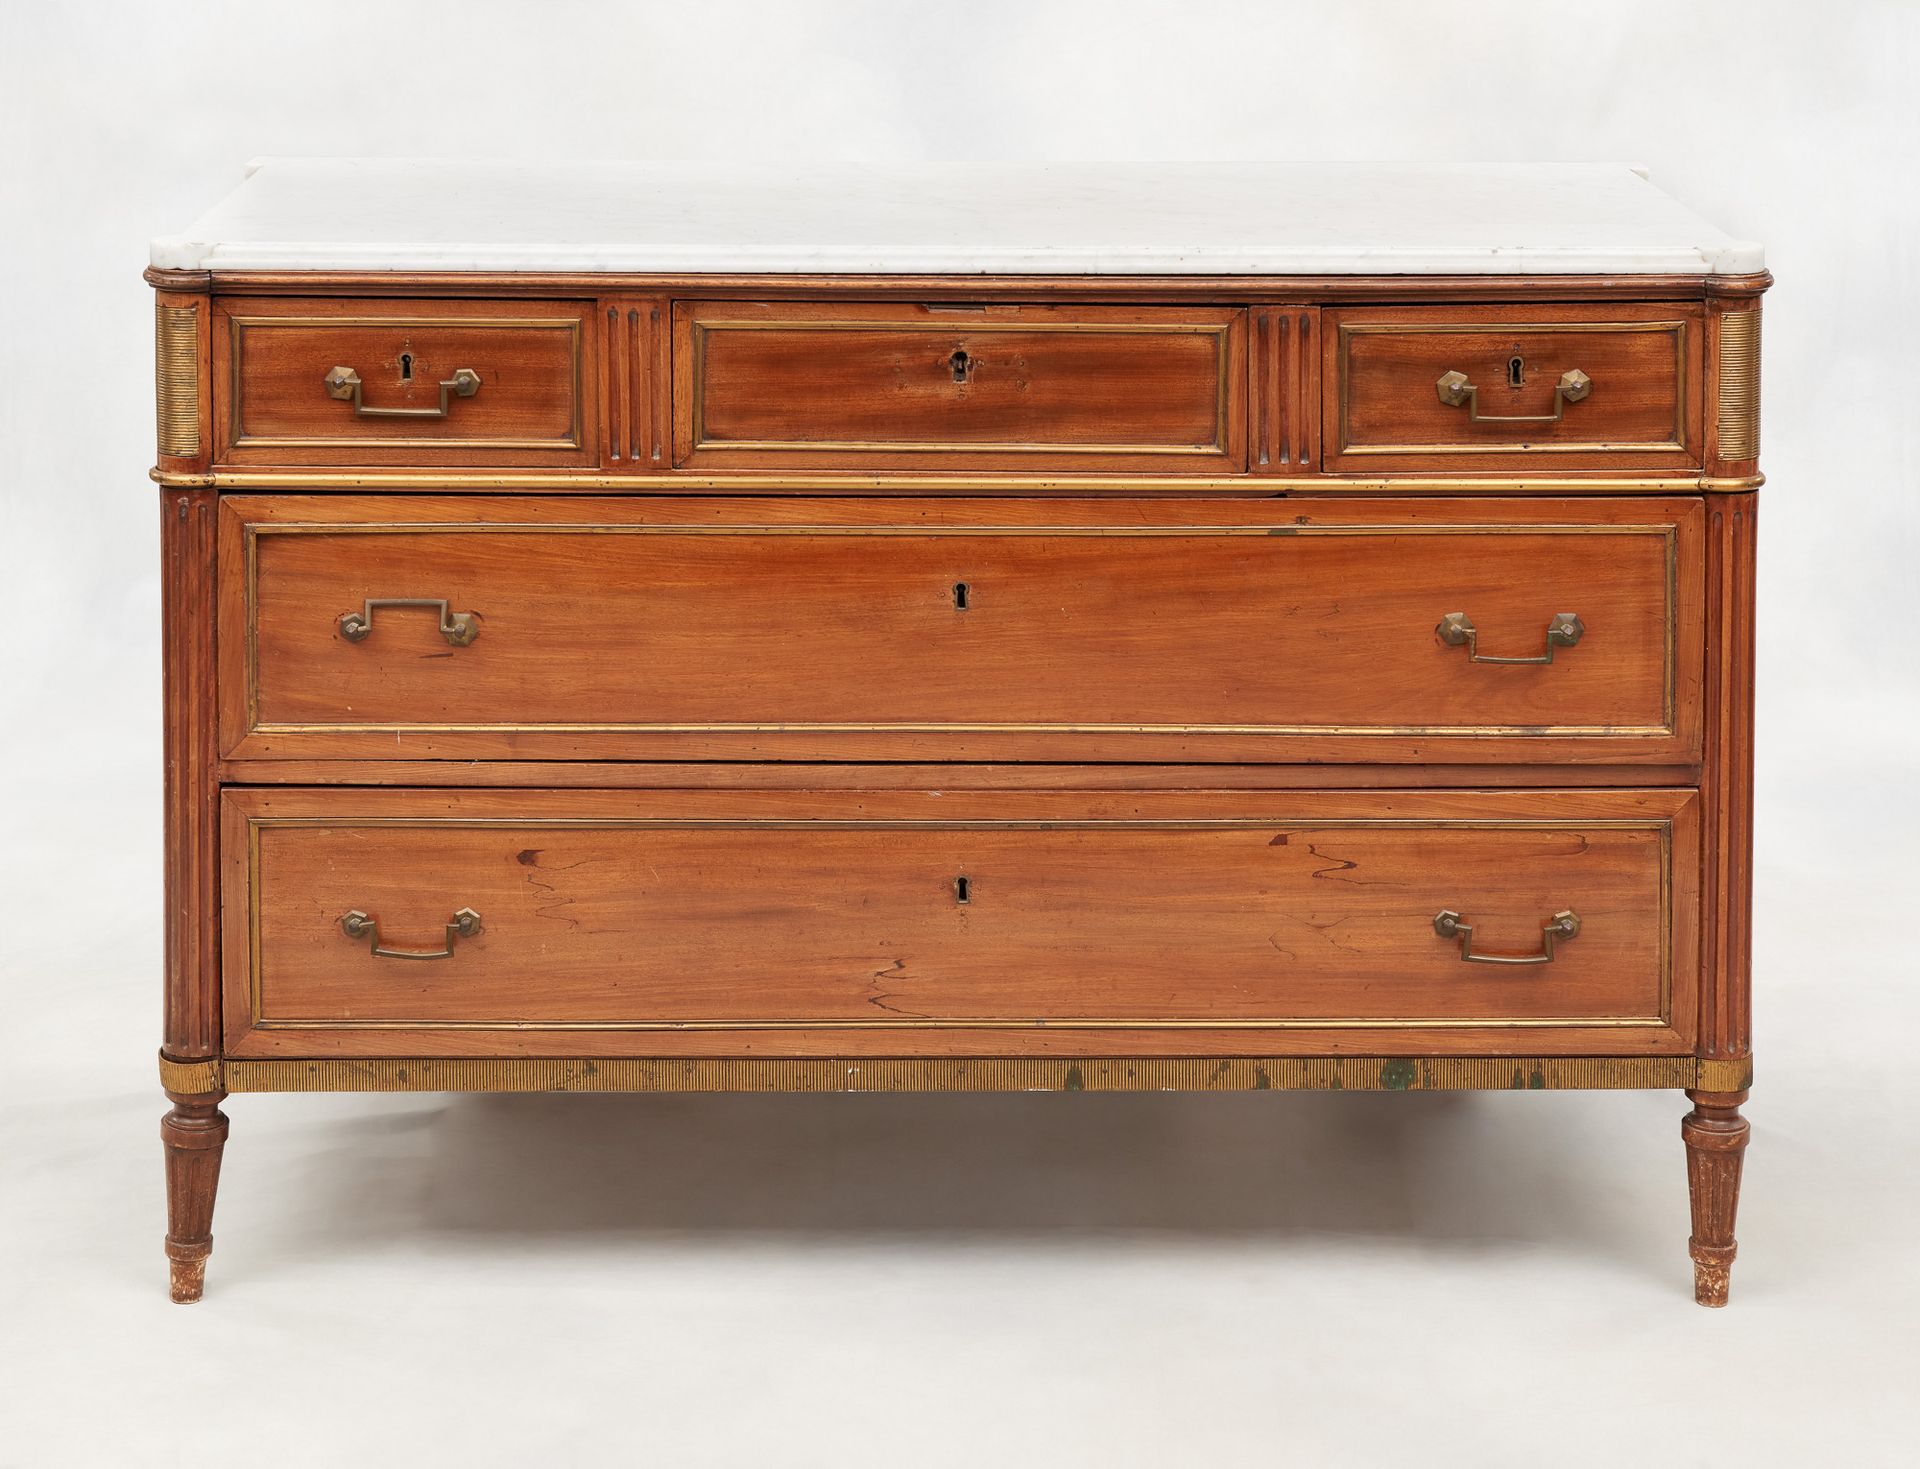 Circa 1800. Piece of furniture: Mahogany chest of drawers with three rows of dra&hellip;